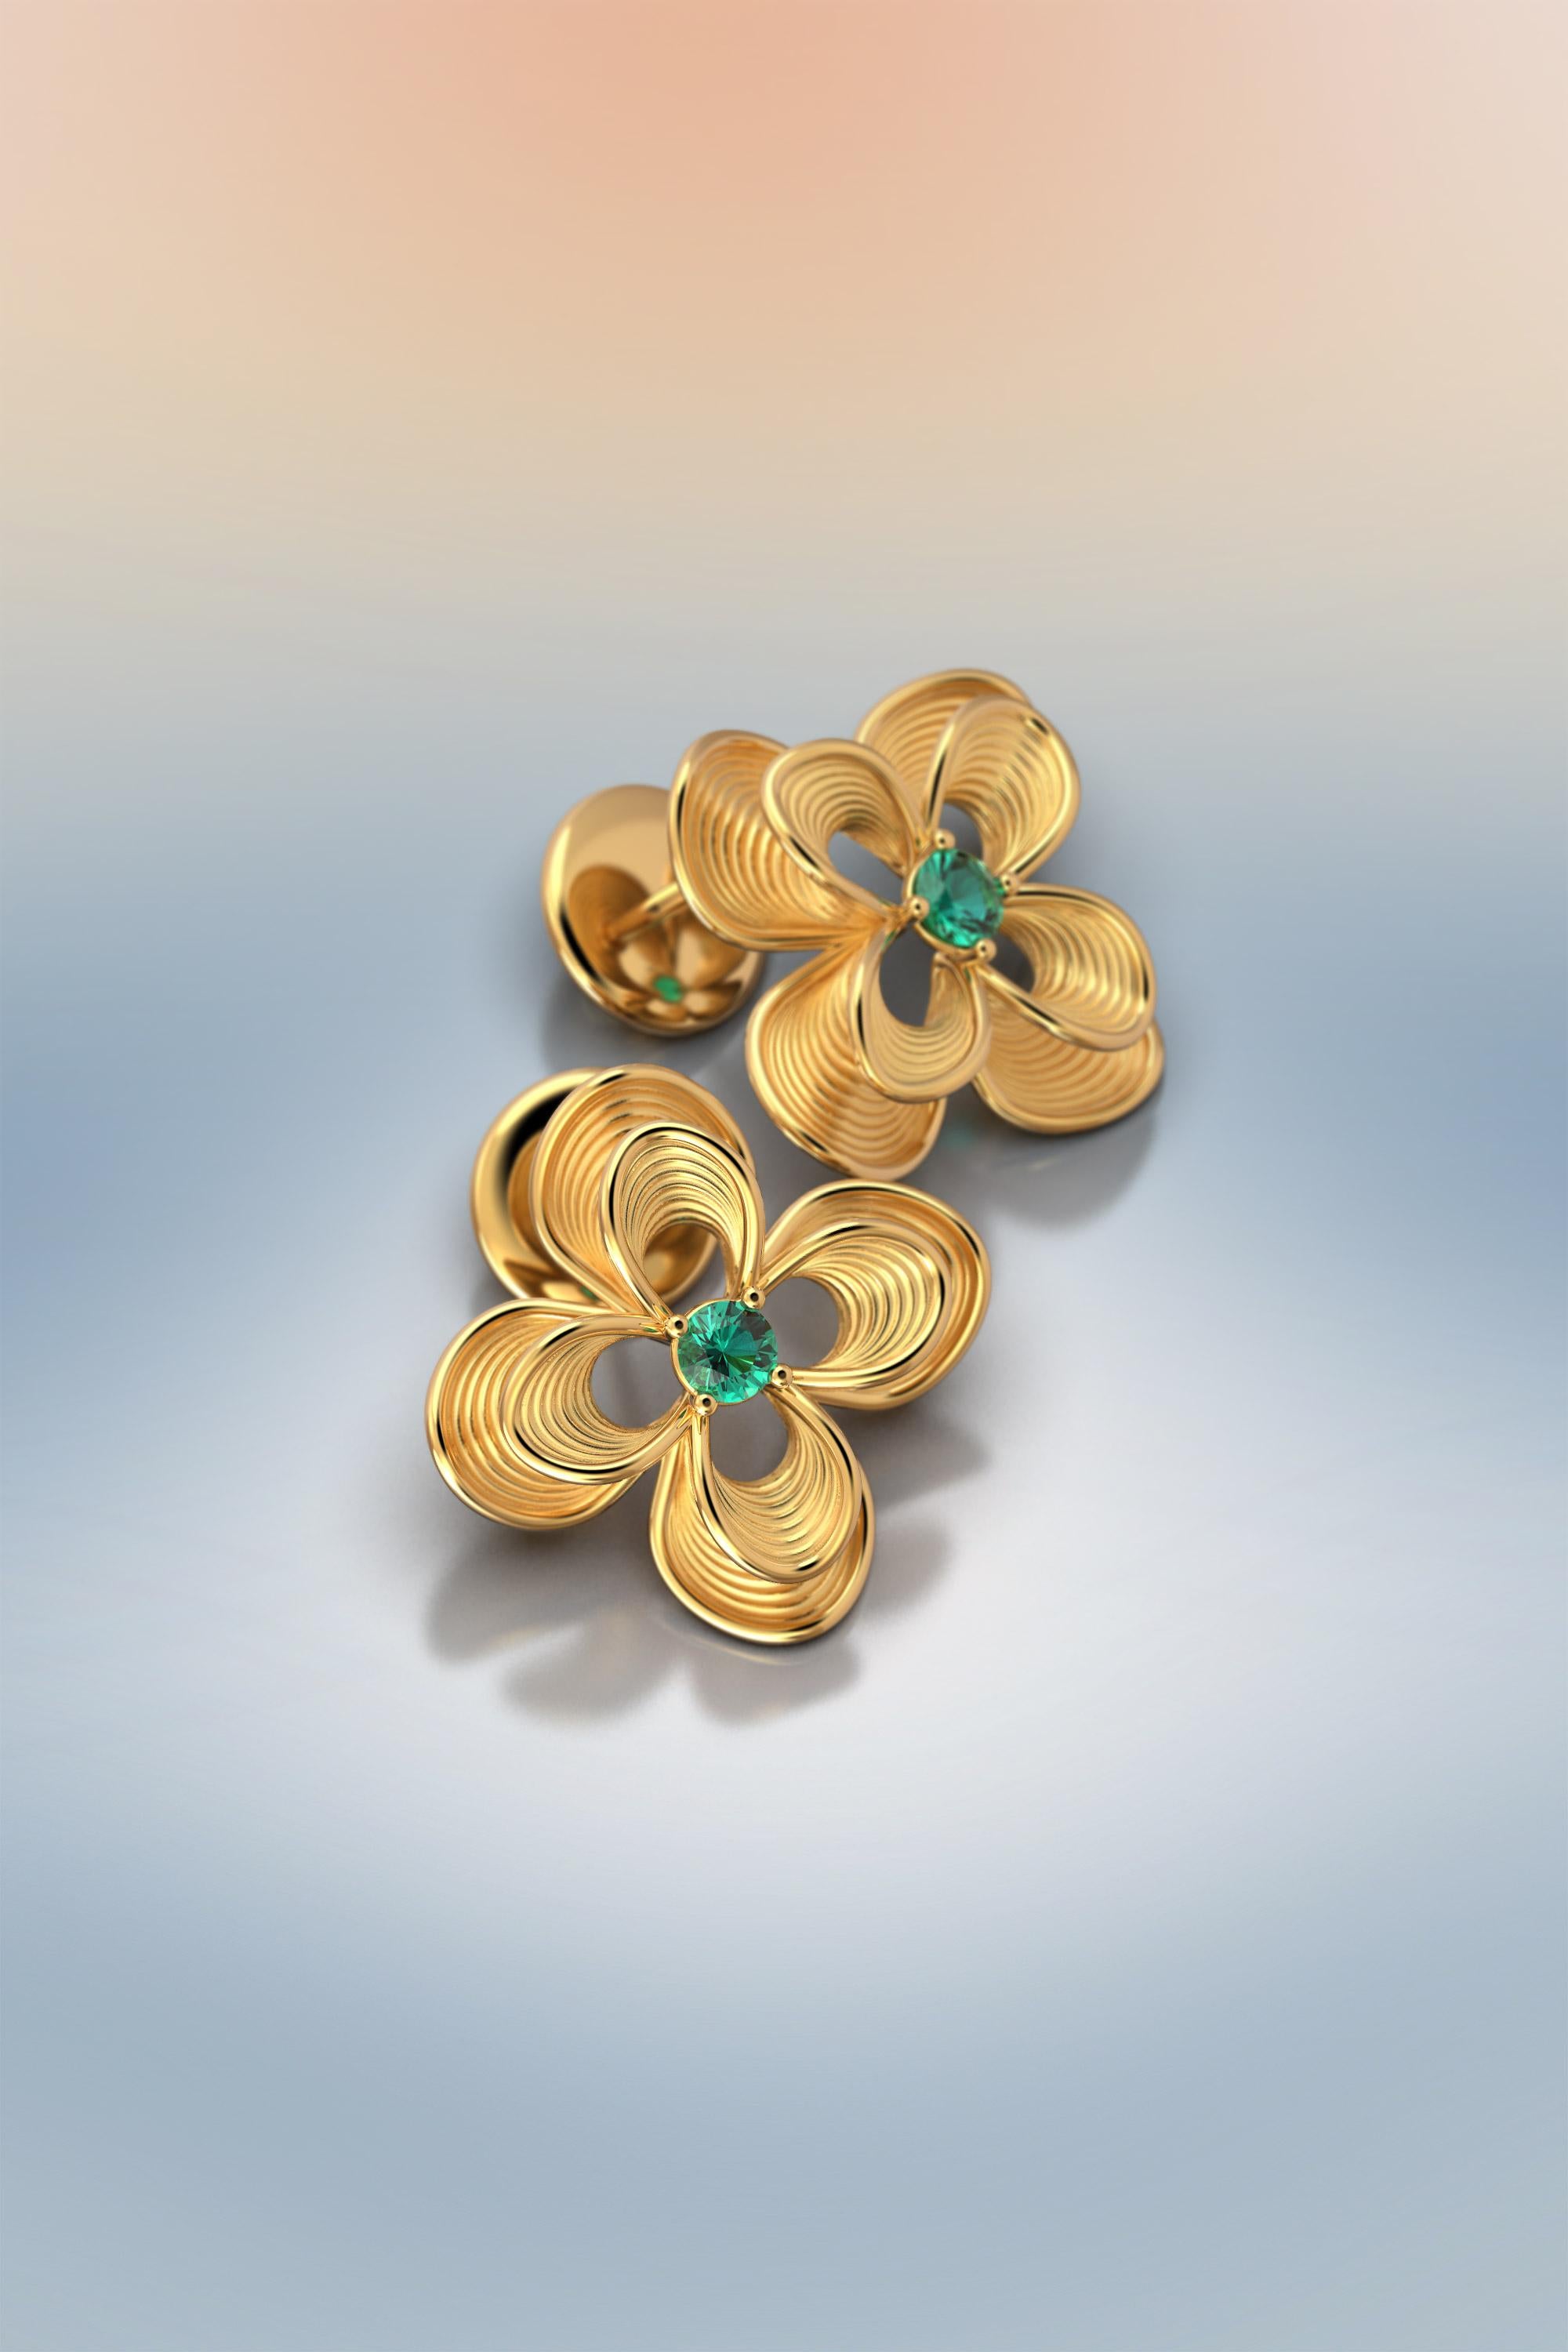 Contemporary Emerald Stud Earrings in 18k Italian Gold by Oltremare Gioielli For Sale